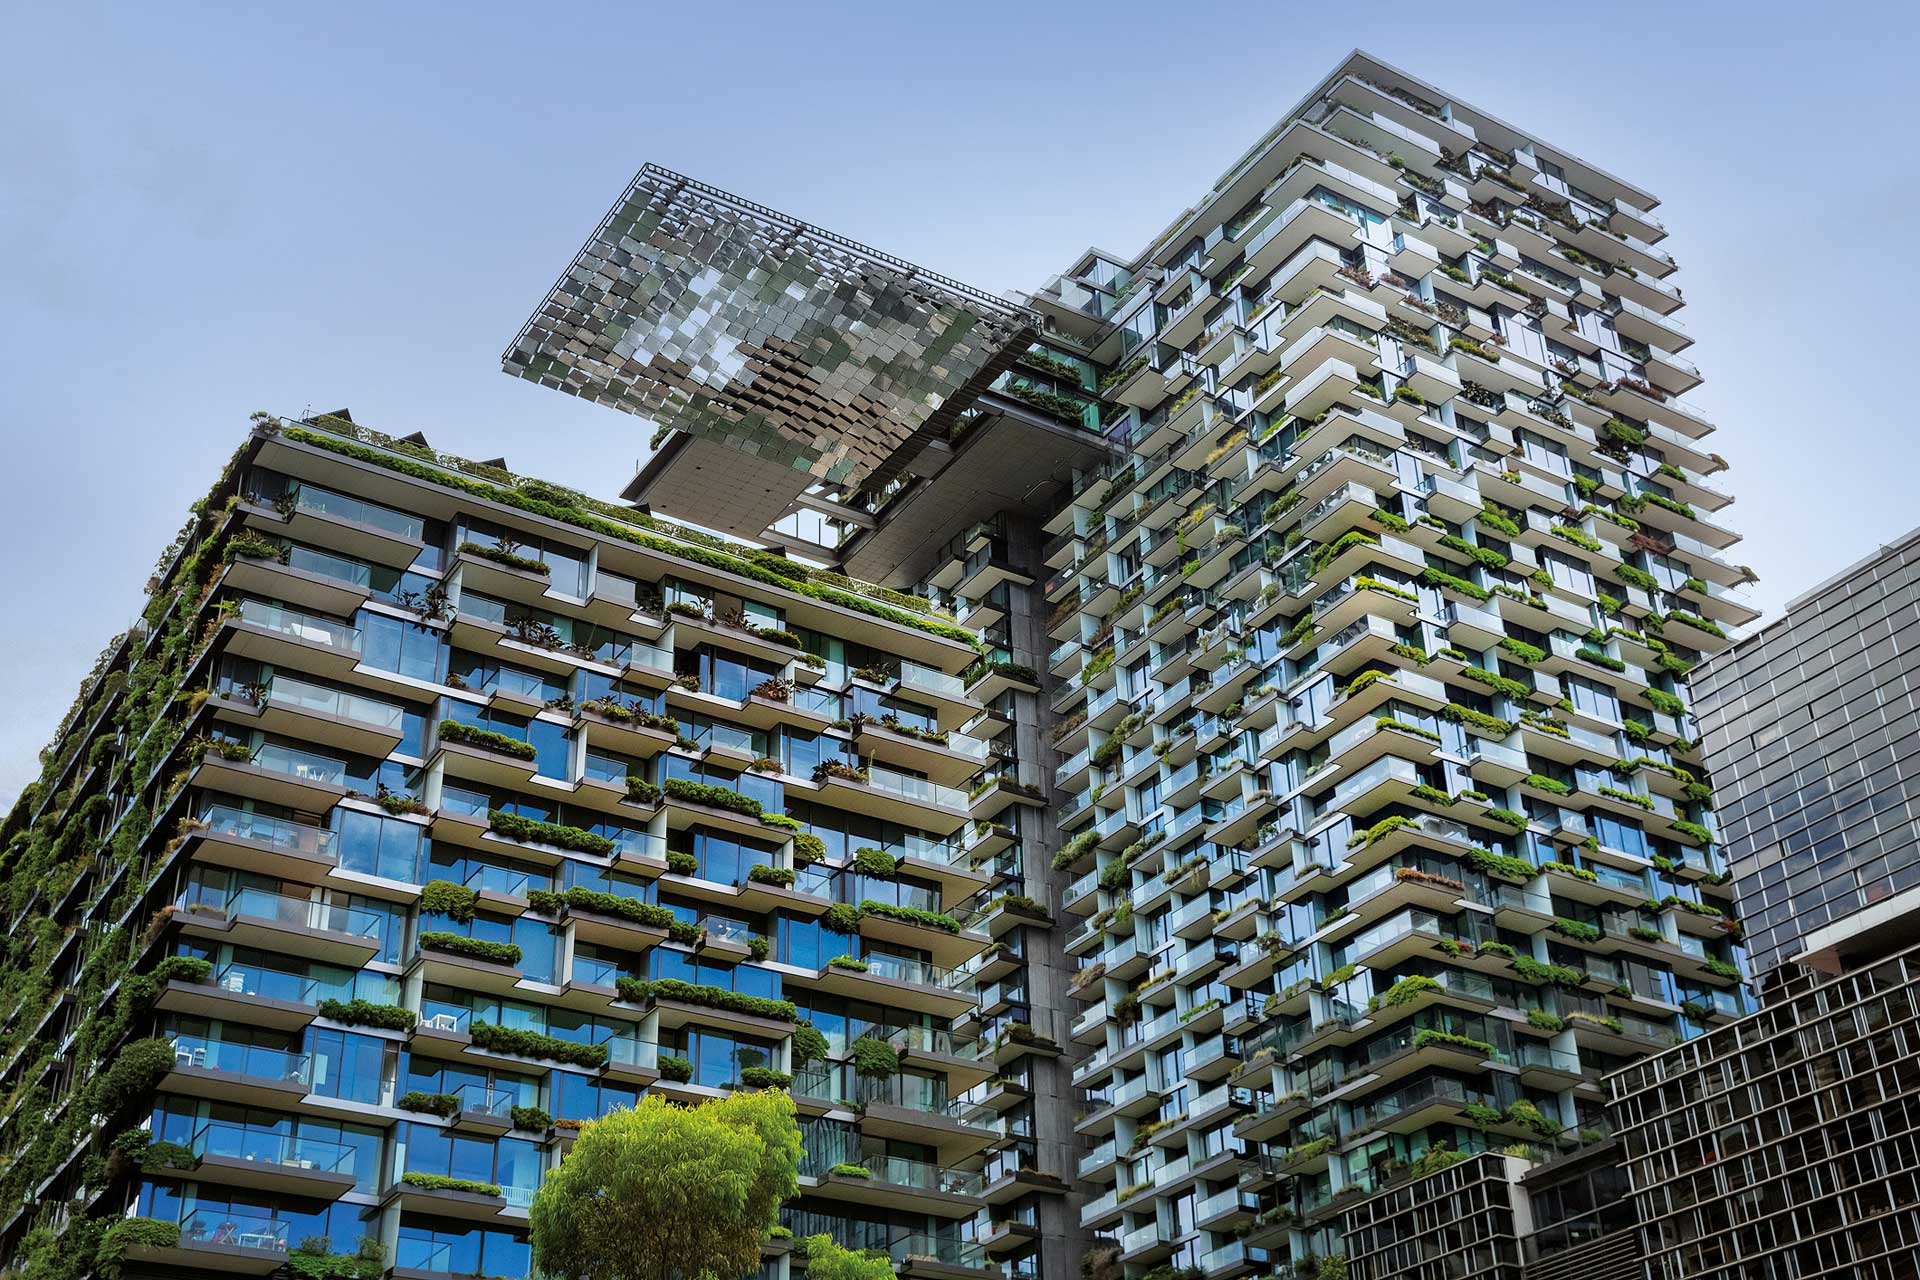 A contemporary multi-story building featuring lush greenery on every balcony, showcasing eco-friendly architectural design